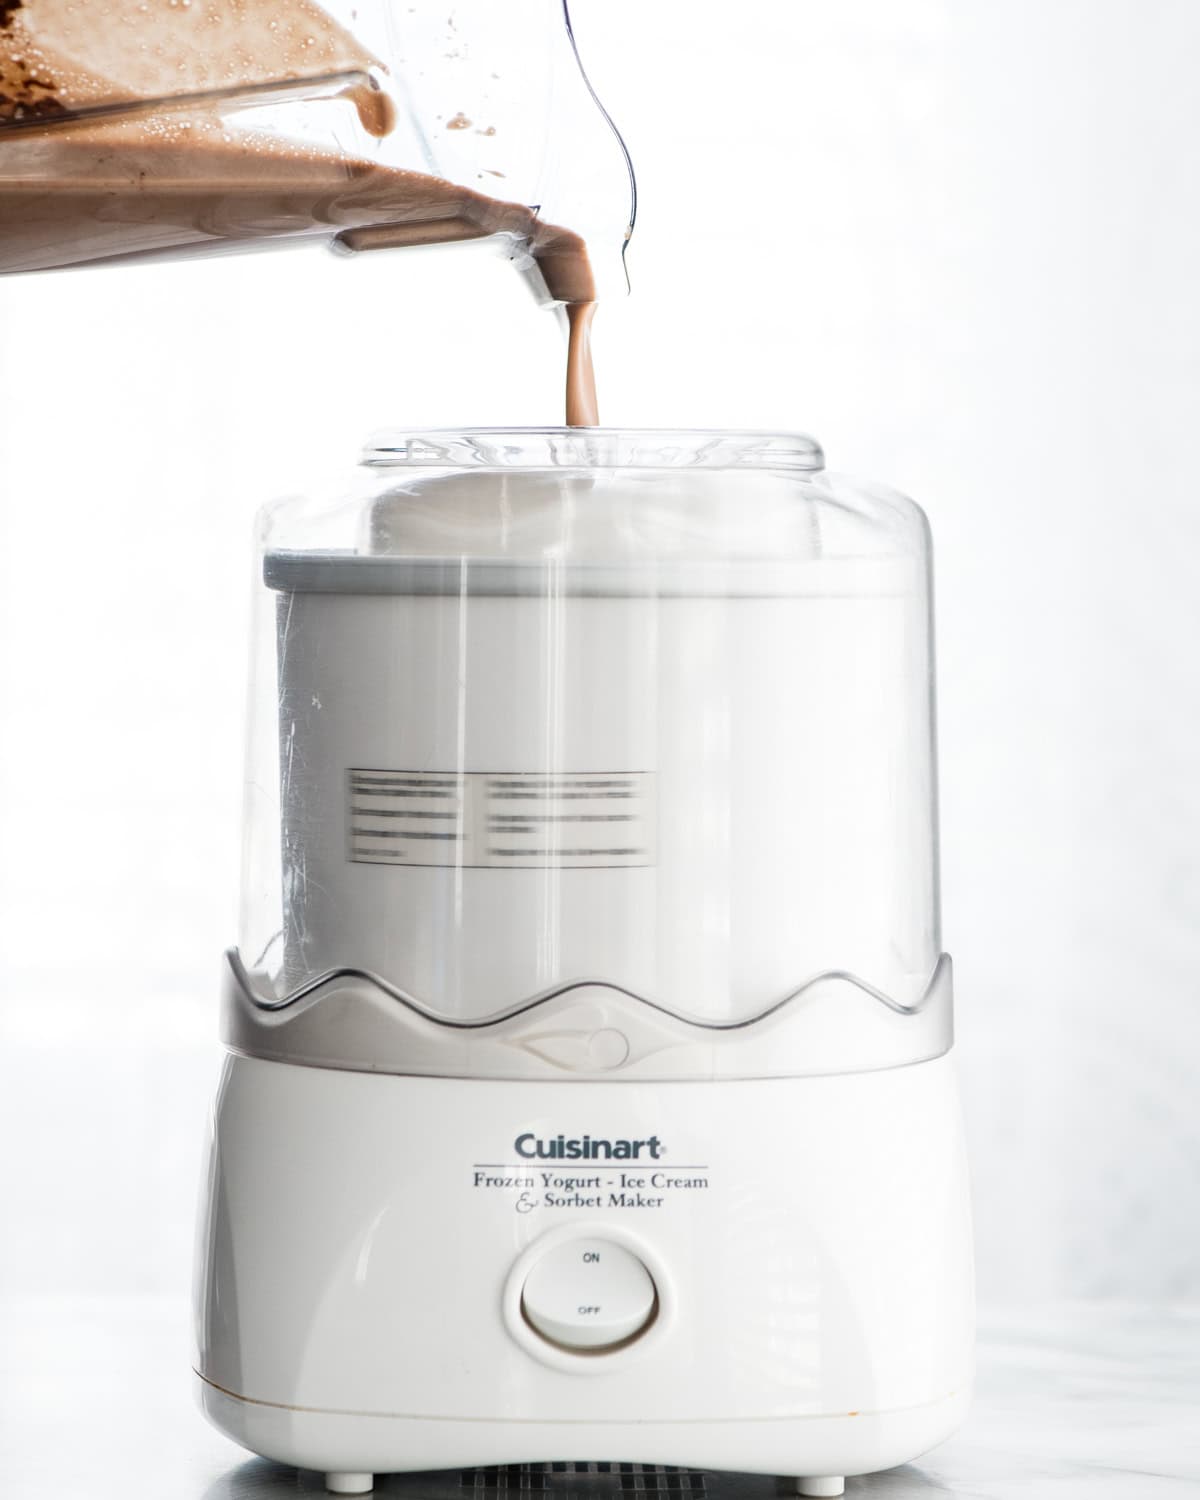 Dairy Free Chocolate Peanut Butter Ice Cream mixture being poured into an ice cream maker